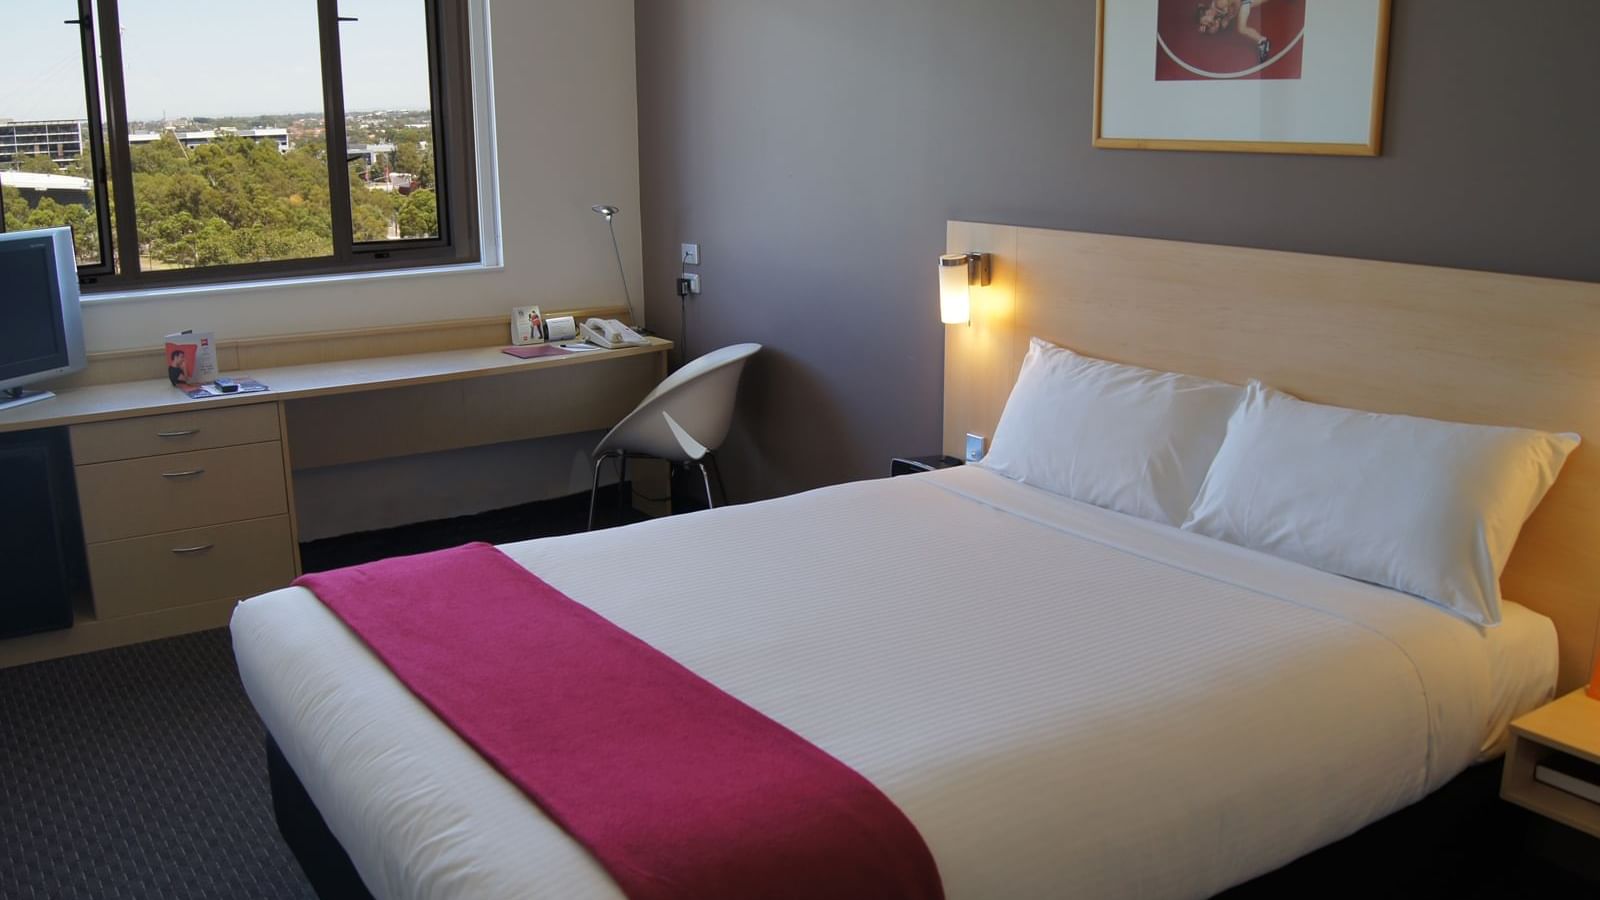 Standard Room with Queen bed at Novotel Sydney Olympic Park